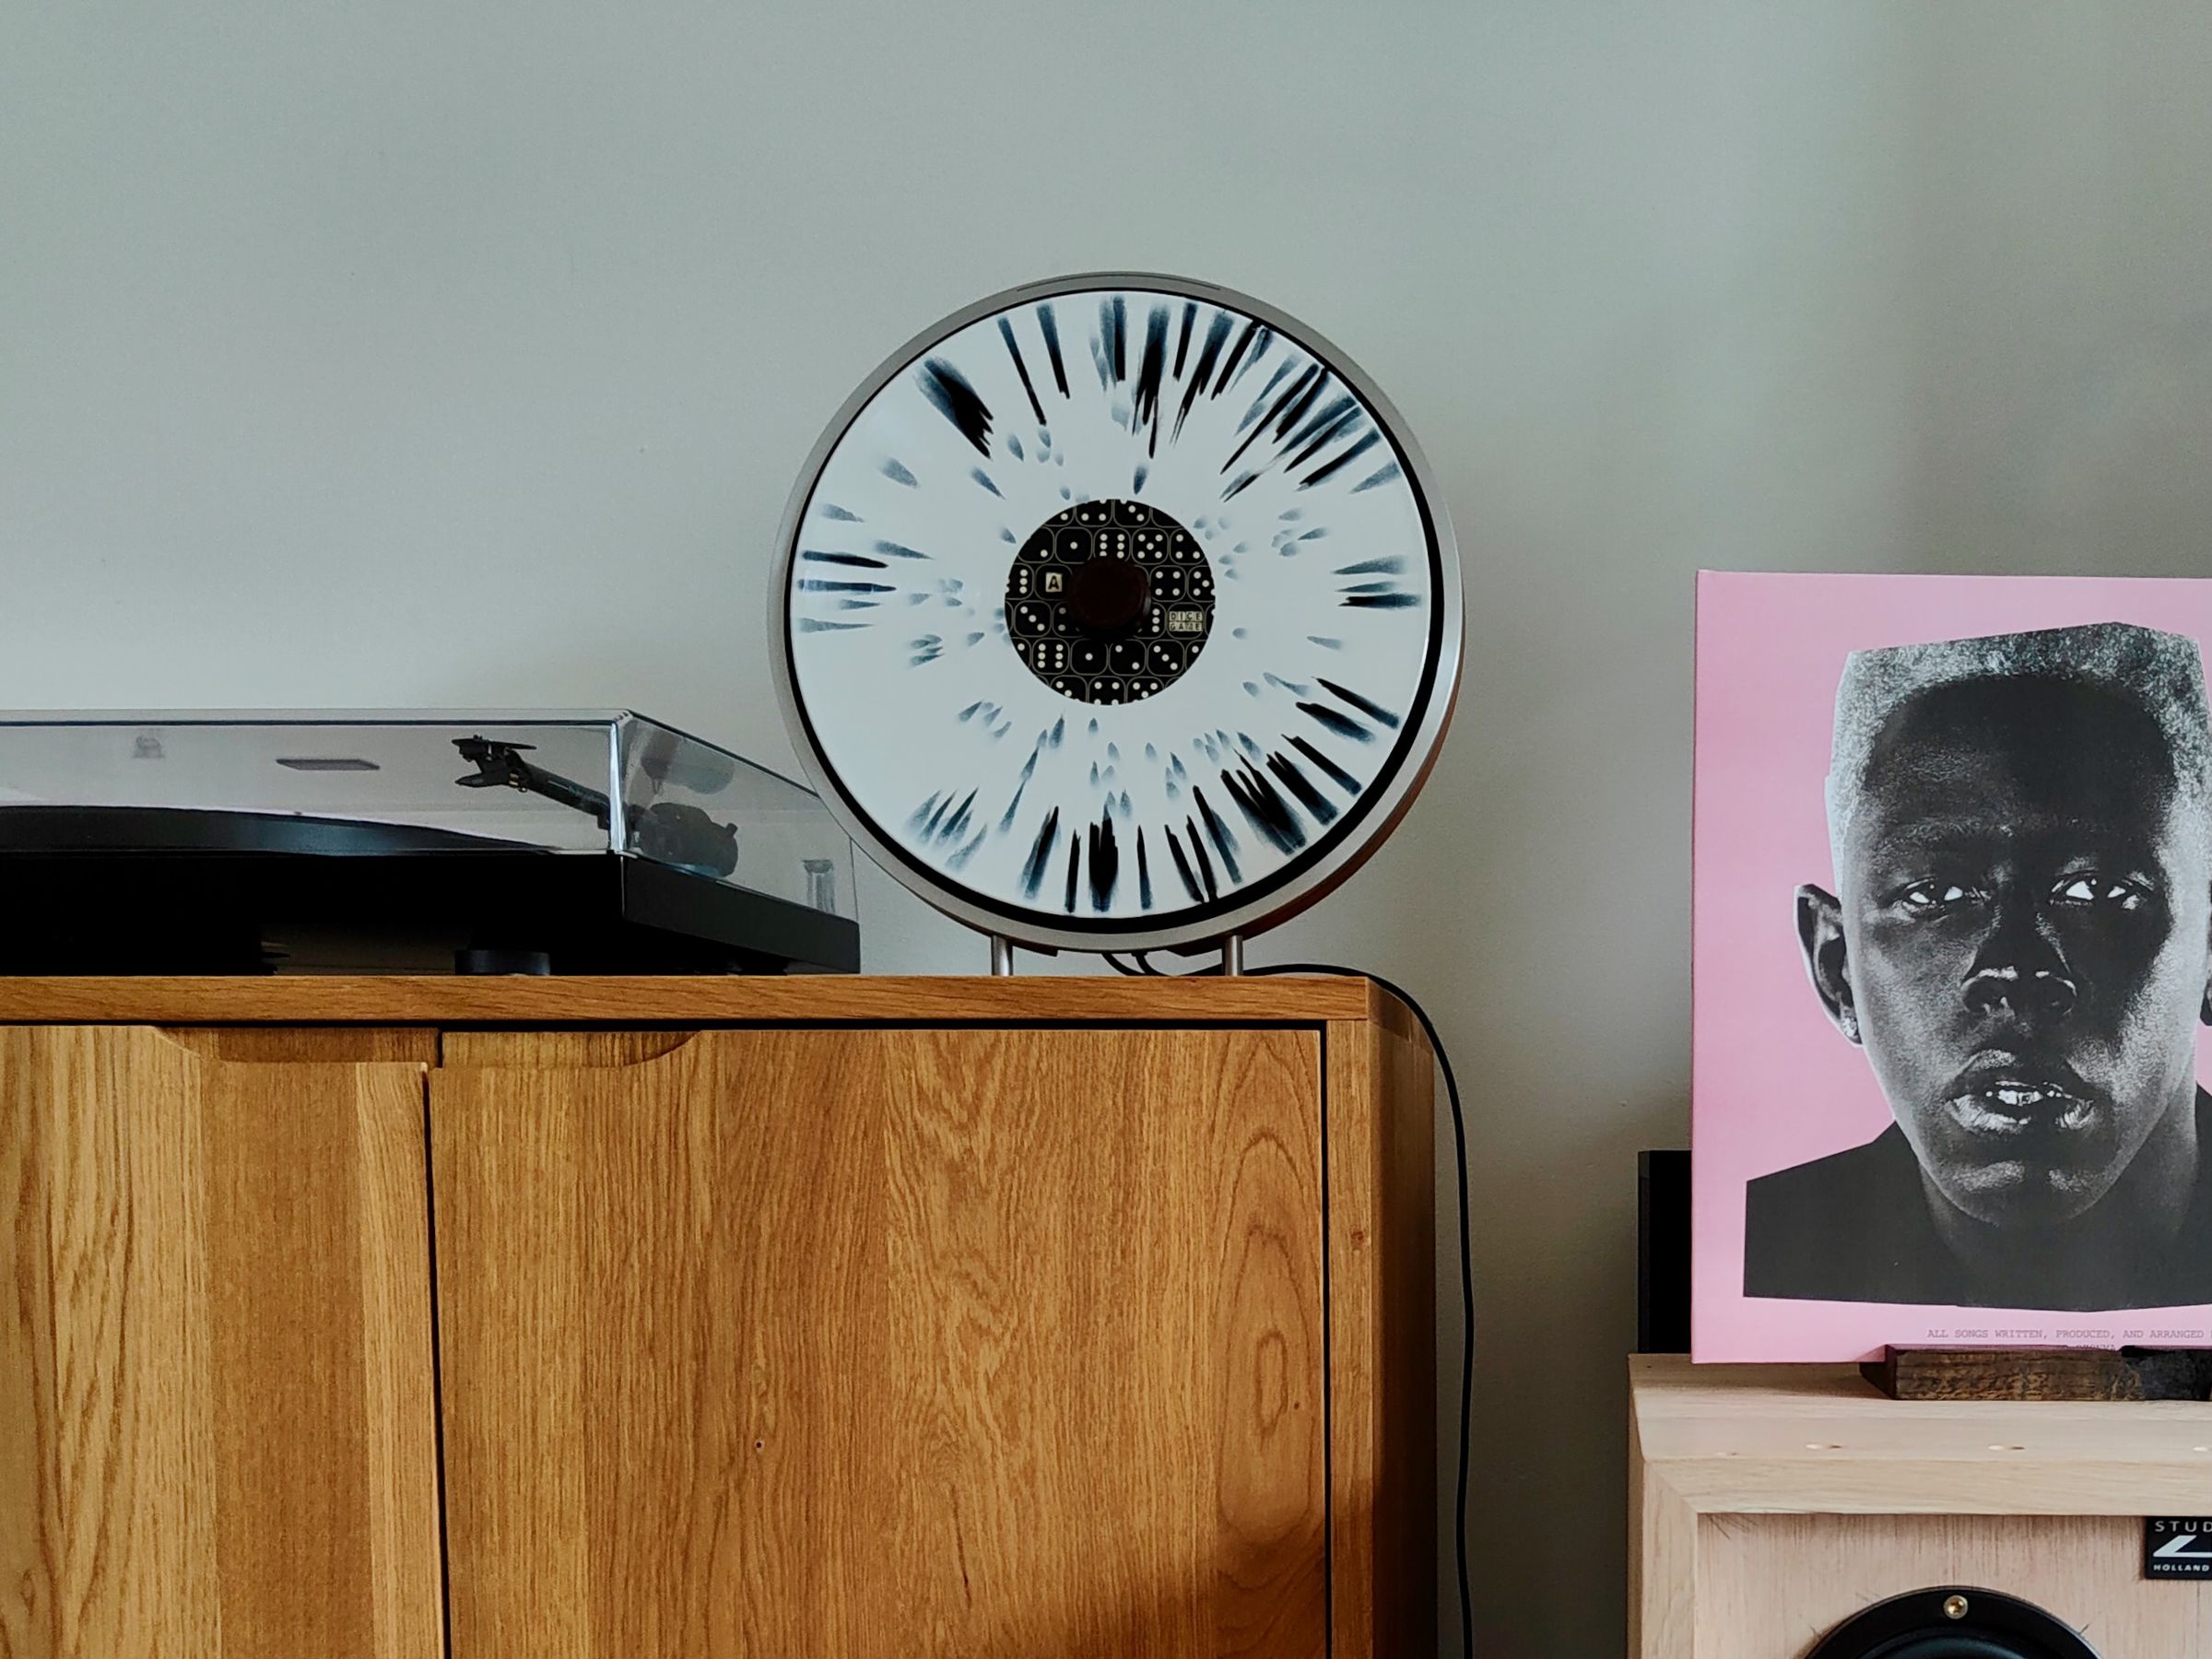 Playing marbled vinyl on the Wheel 2 elevates the listening experience with a new visual aesthetic that’s not normally visible when played horizontally. Tyler the Creator approves.